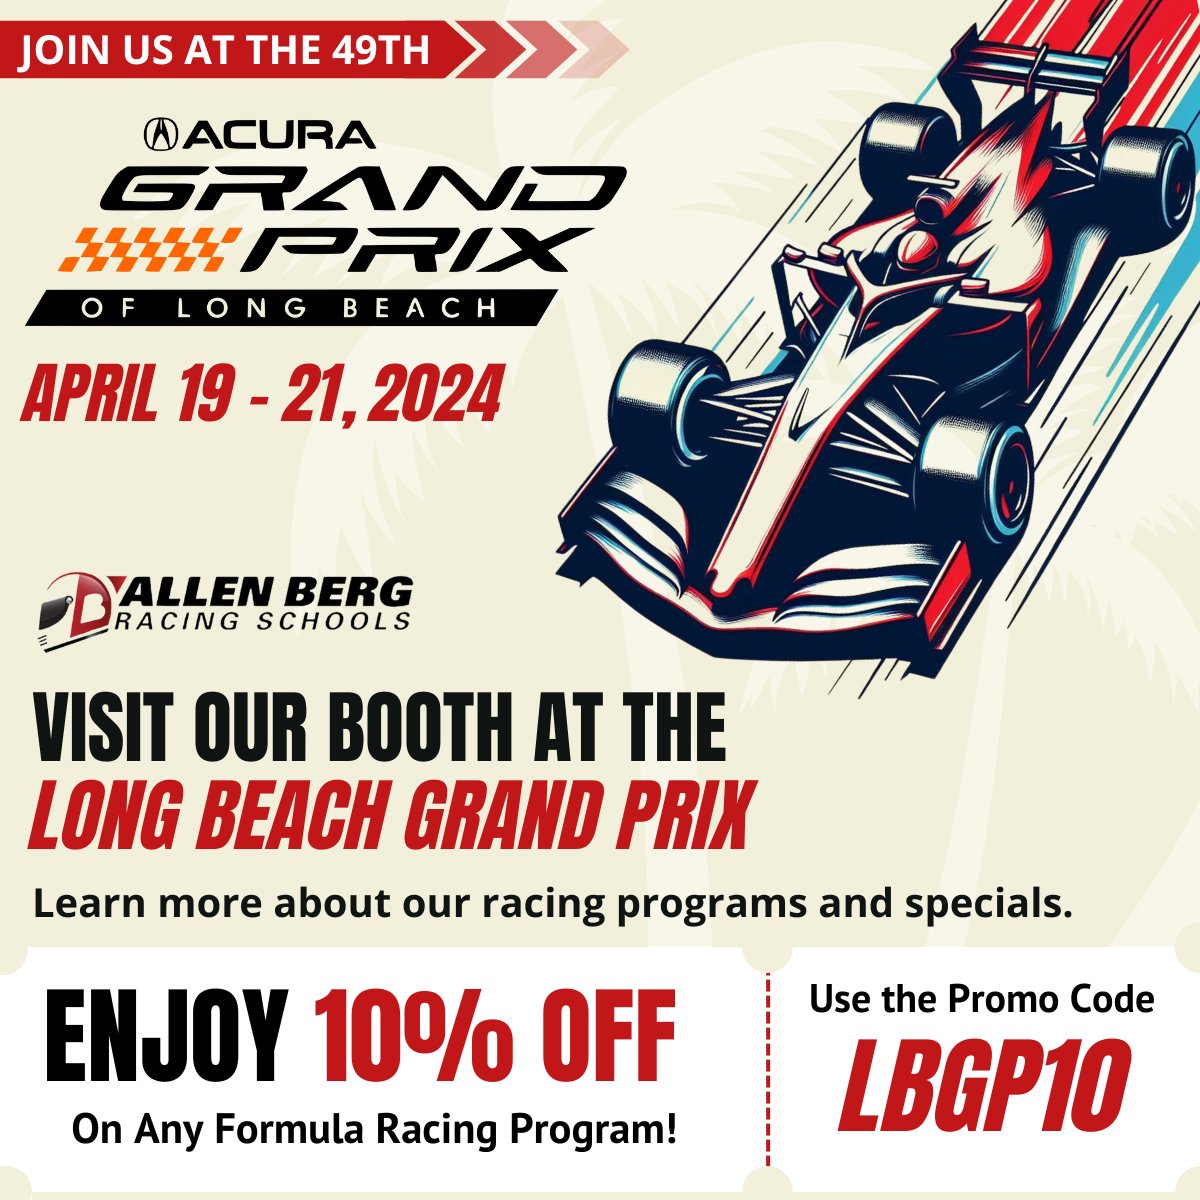 🏎️🔥 Only one more day until the Long Beach Grand Prix kicks off! Allen Berg Racing Schools will be there all weekend, offering an exclusive 10% discount on our formula racing programs. Remember to use promo code LBGP10 at our booth to unlock the discount. #LBGP #FormulaRacing